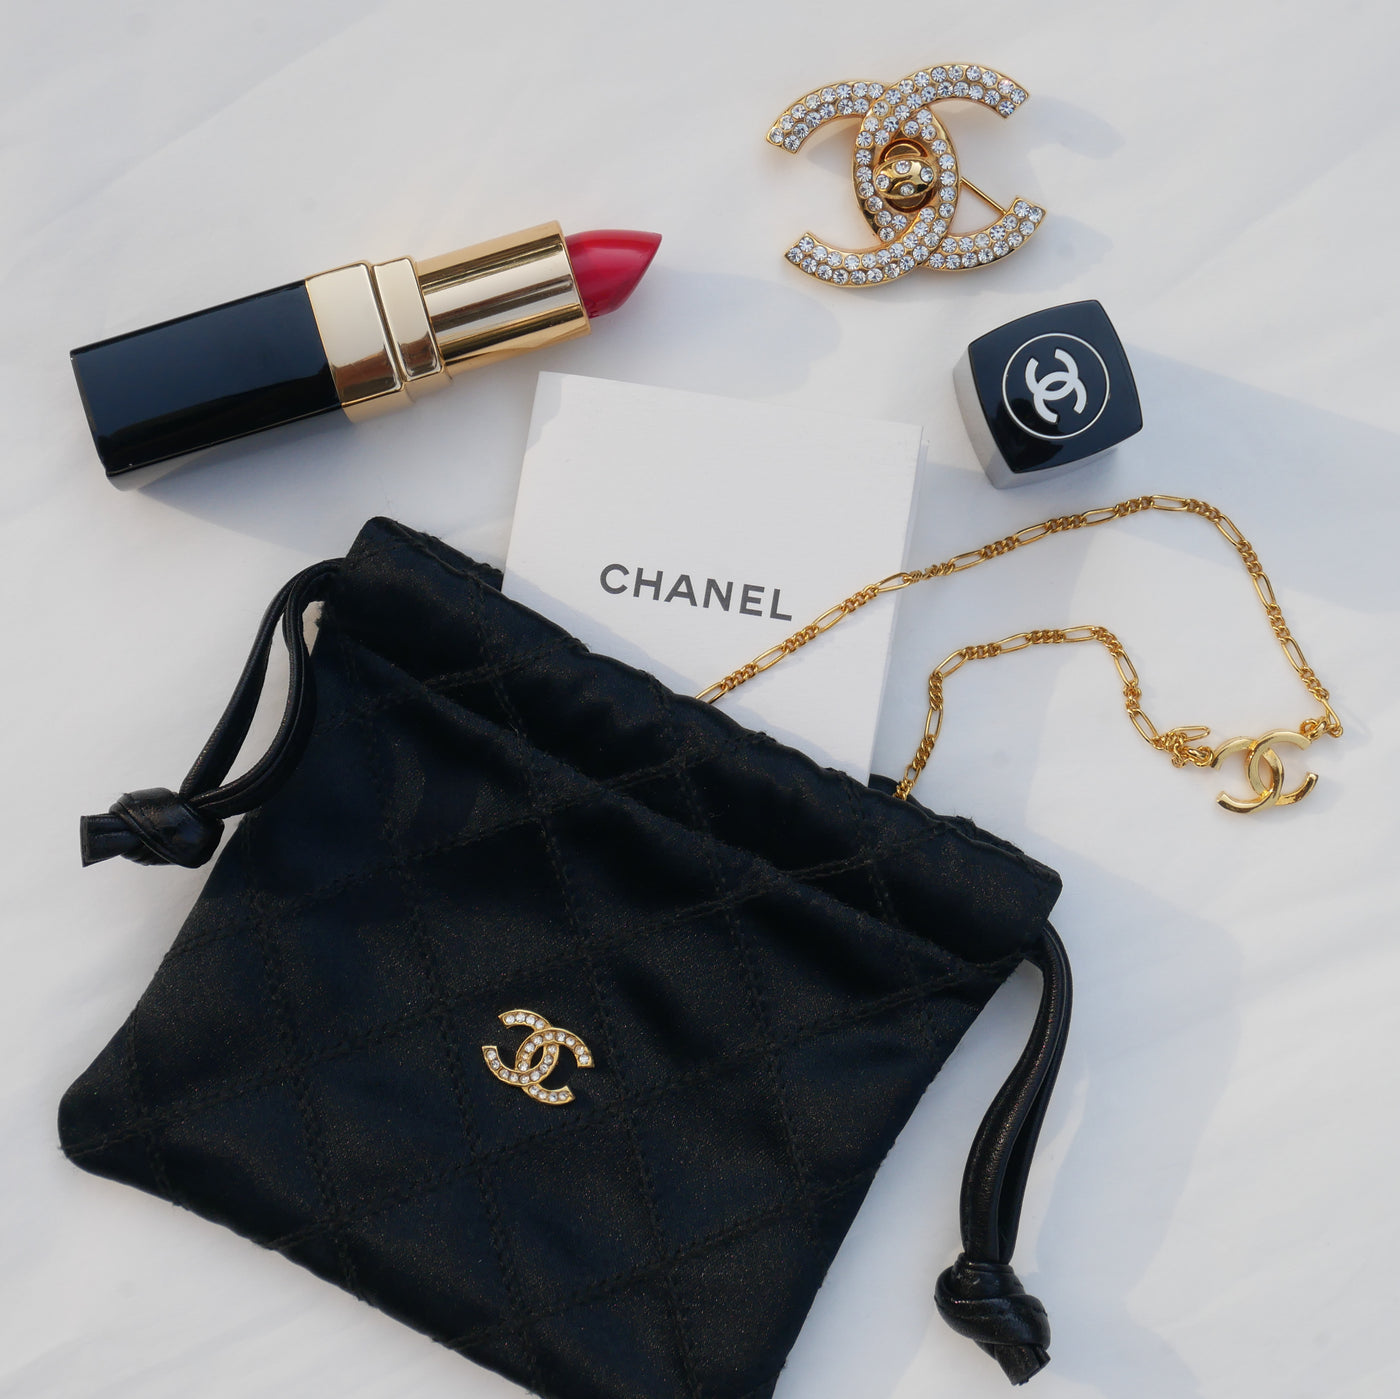 First CHANEL